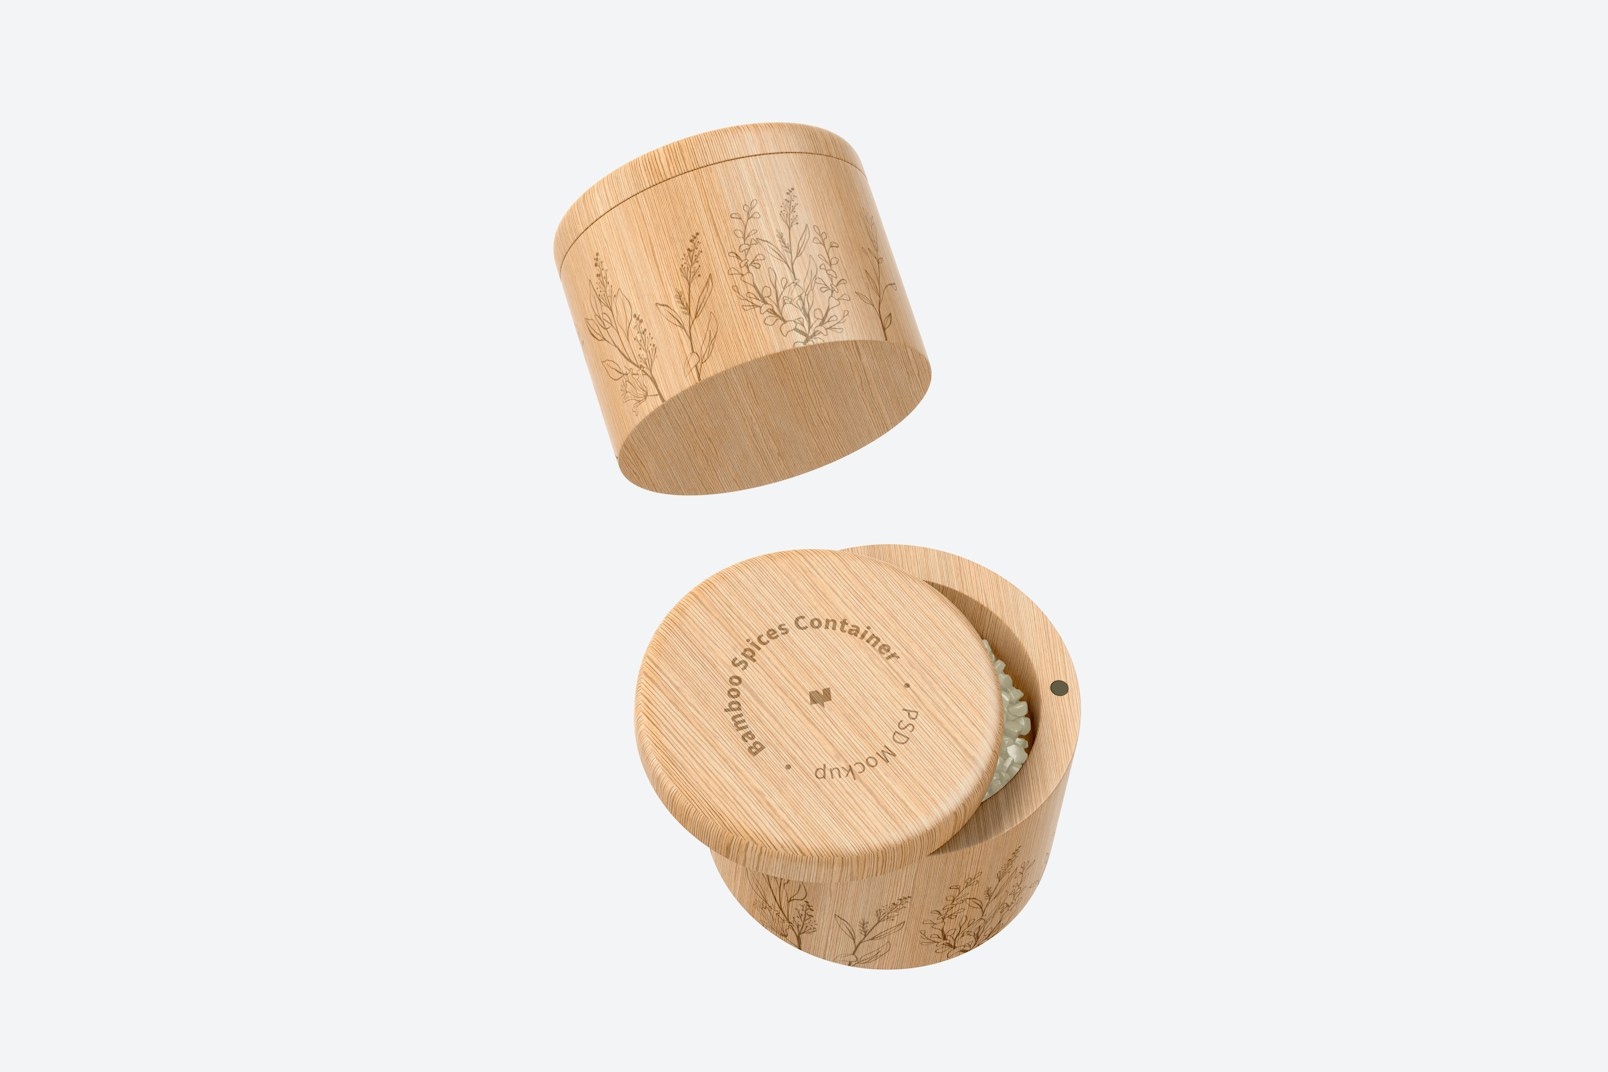 Bamboo Spices Containers Mockup, Floating